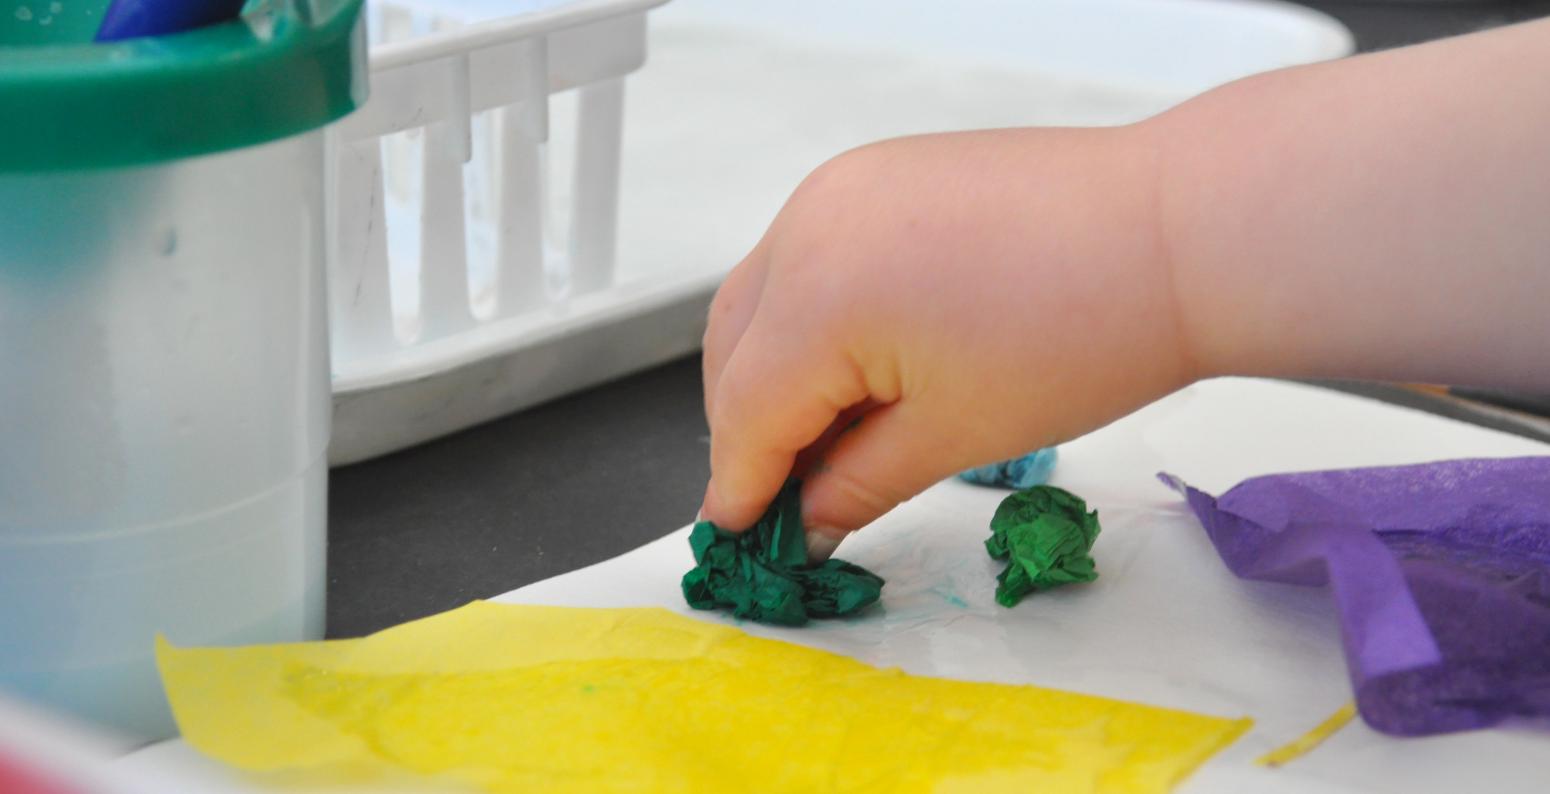 A young child gently places a crumpled piece of green tissue paper onto their background paper with glue.